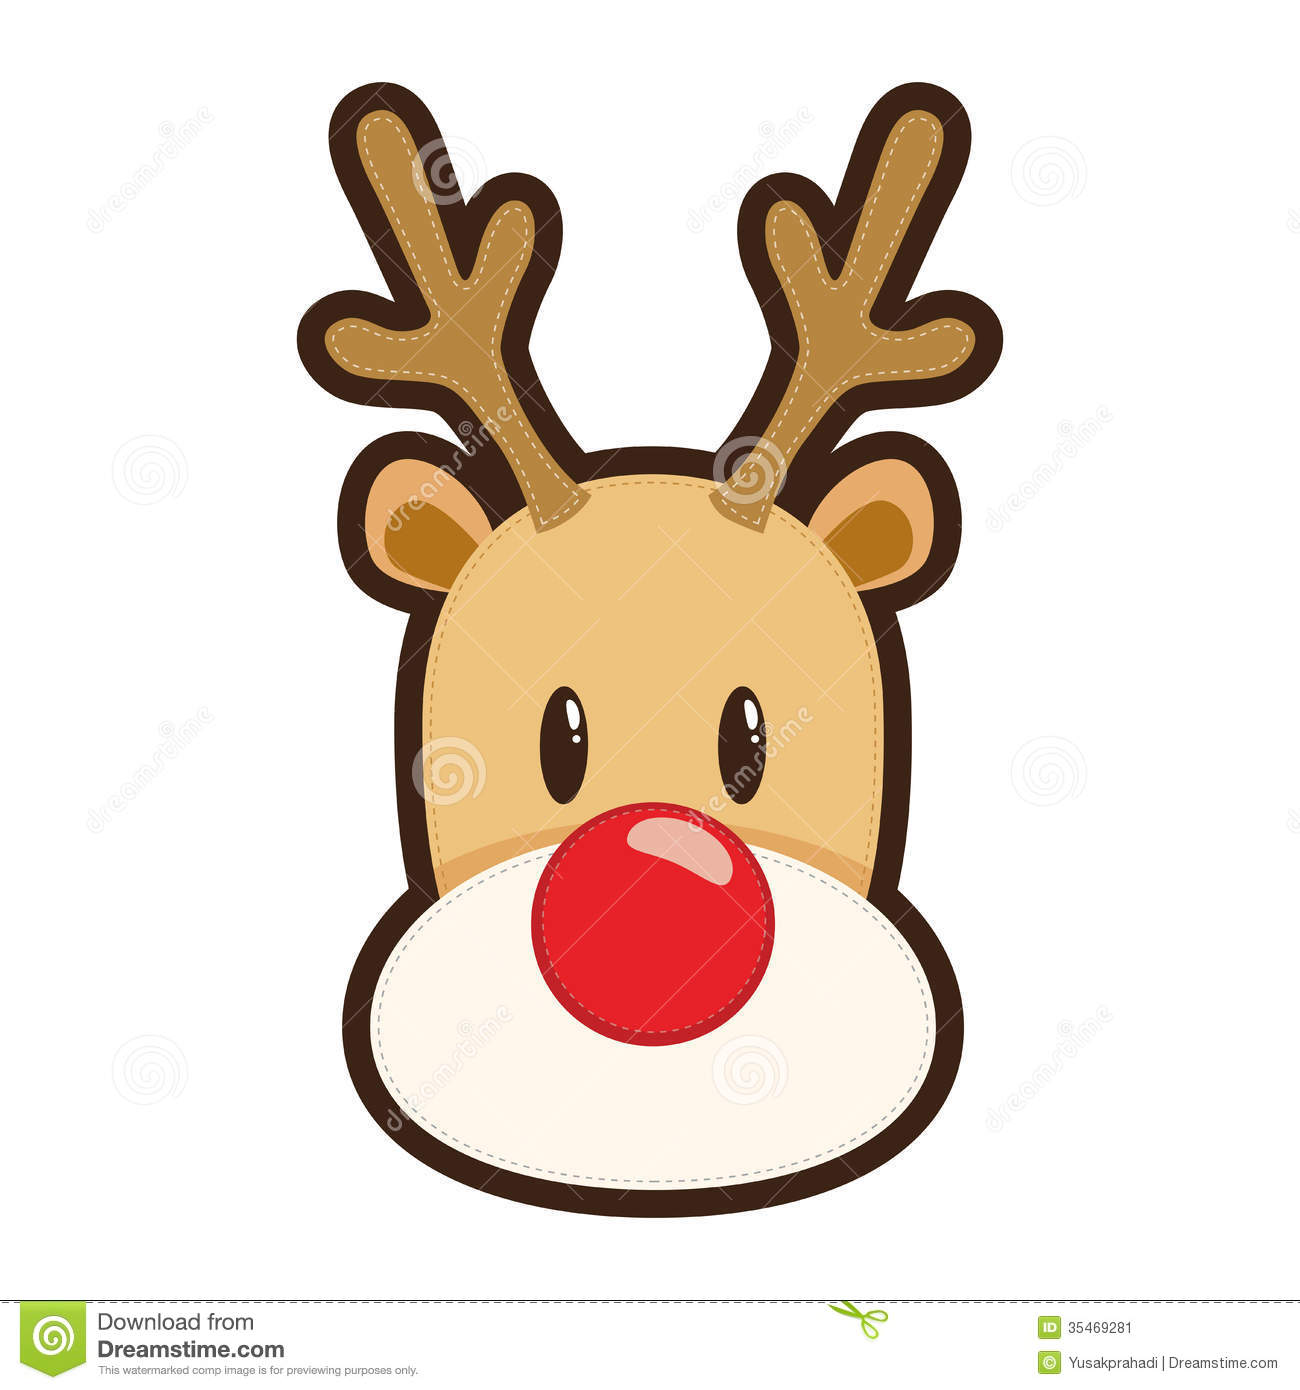 Cartoon Illustration Of Rudolph The Red Nosed Reindeer White